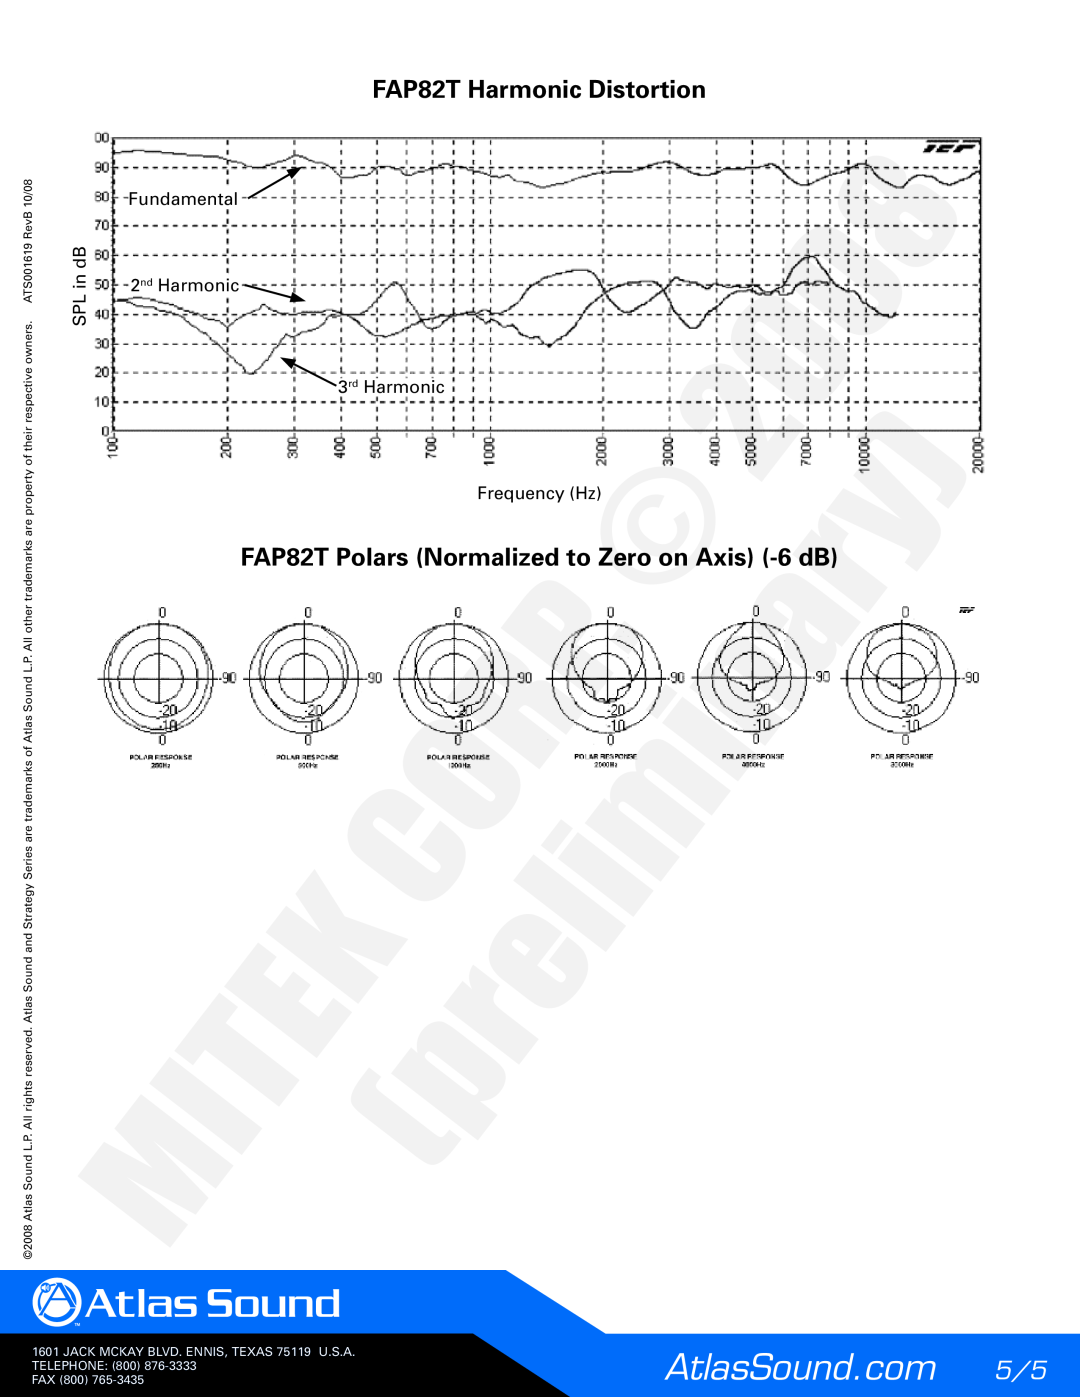 Atlas Sound FAP82T Harmonic Distortion, FAP82T Polars Normalized to Zero on Axis -6dB, preliminaryFrequency Hz, Fax 